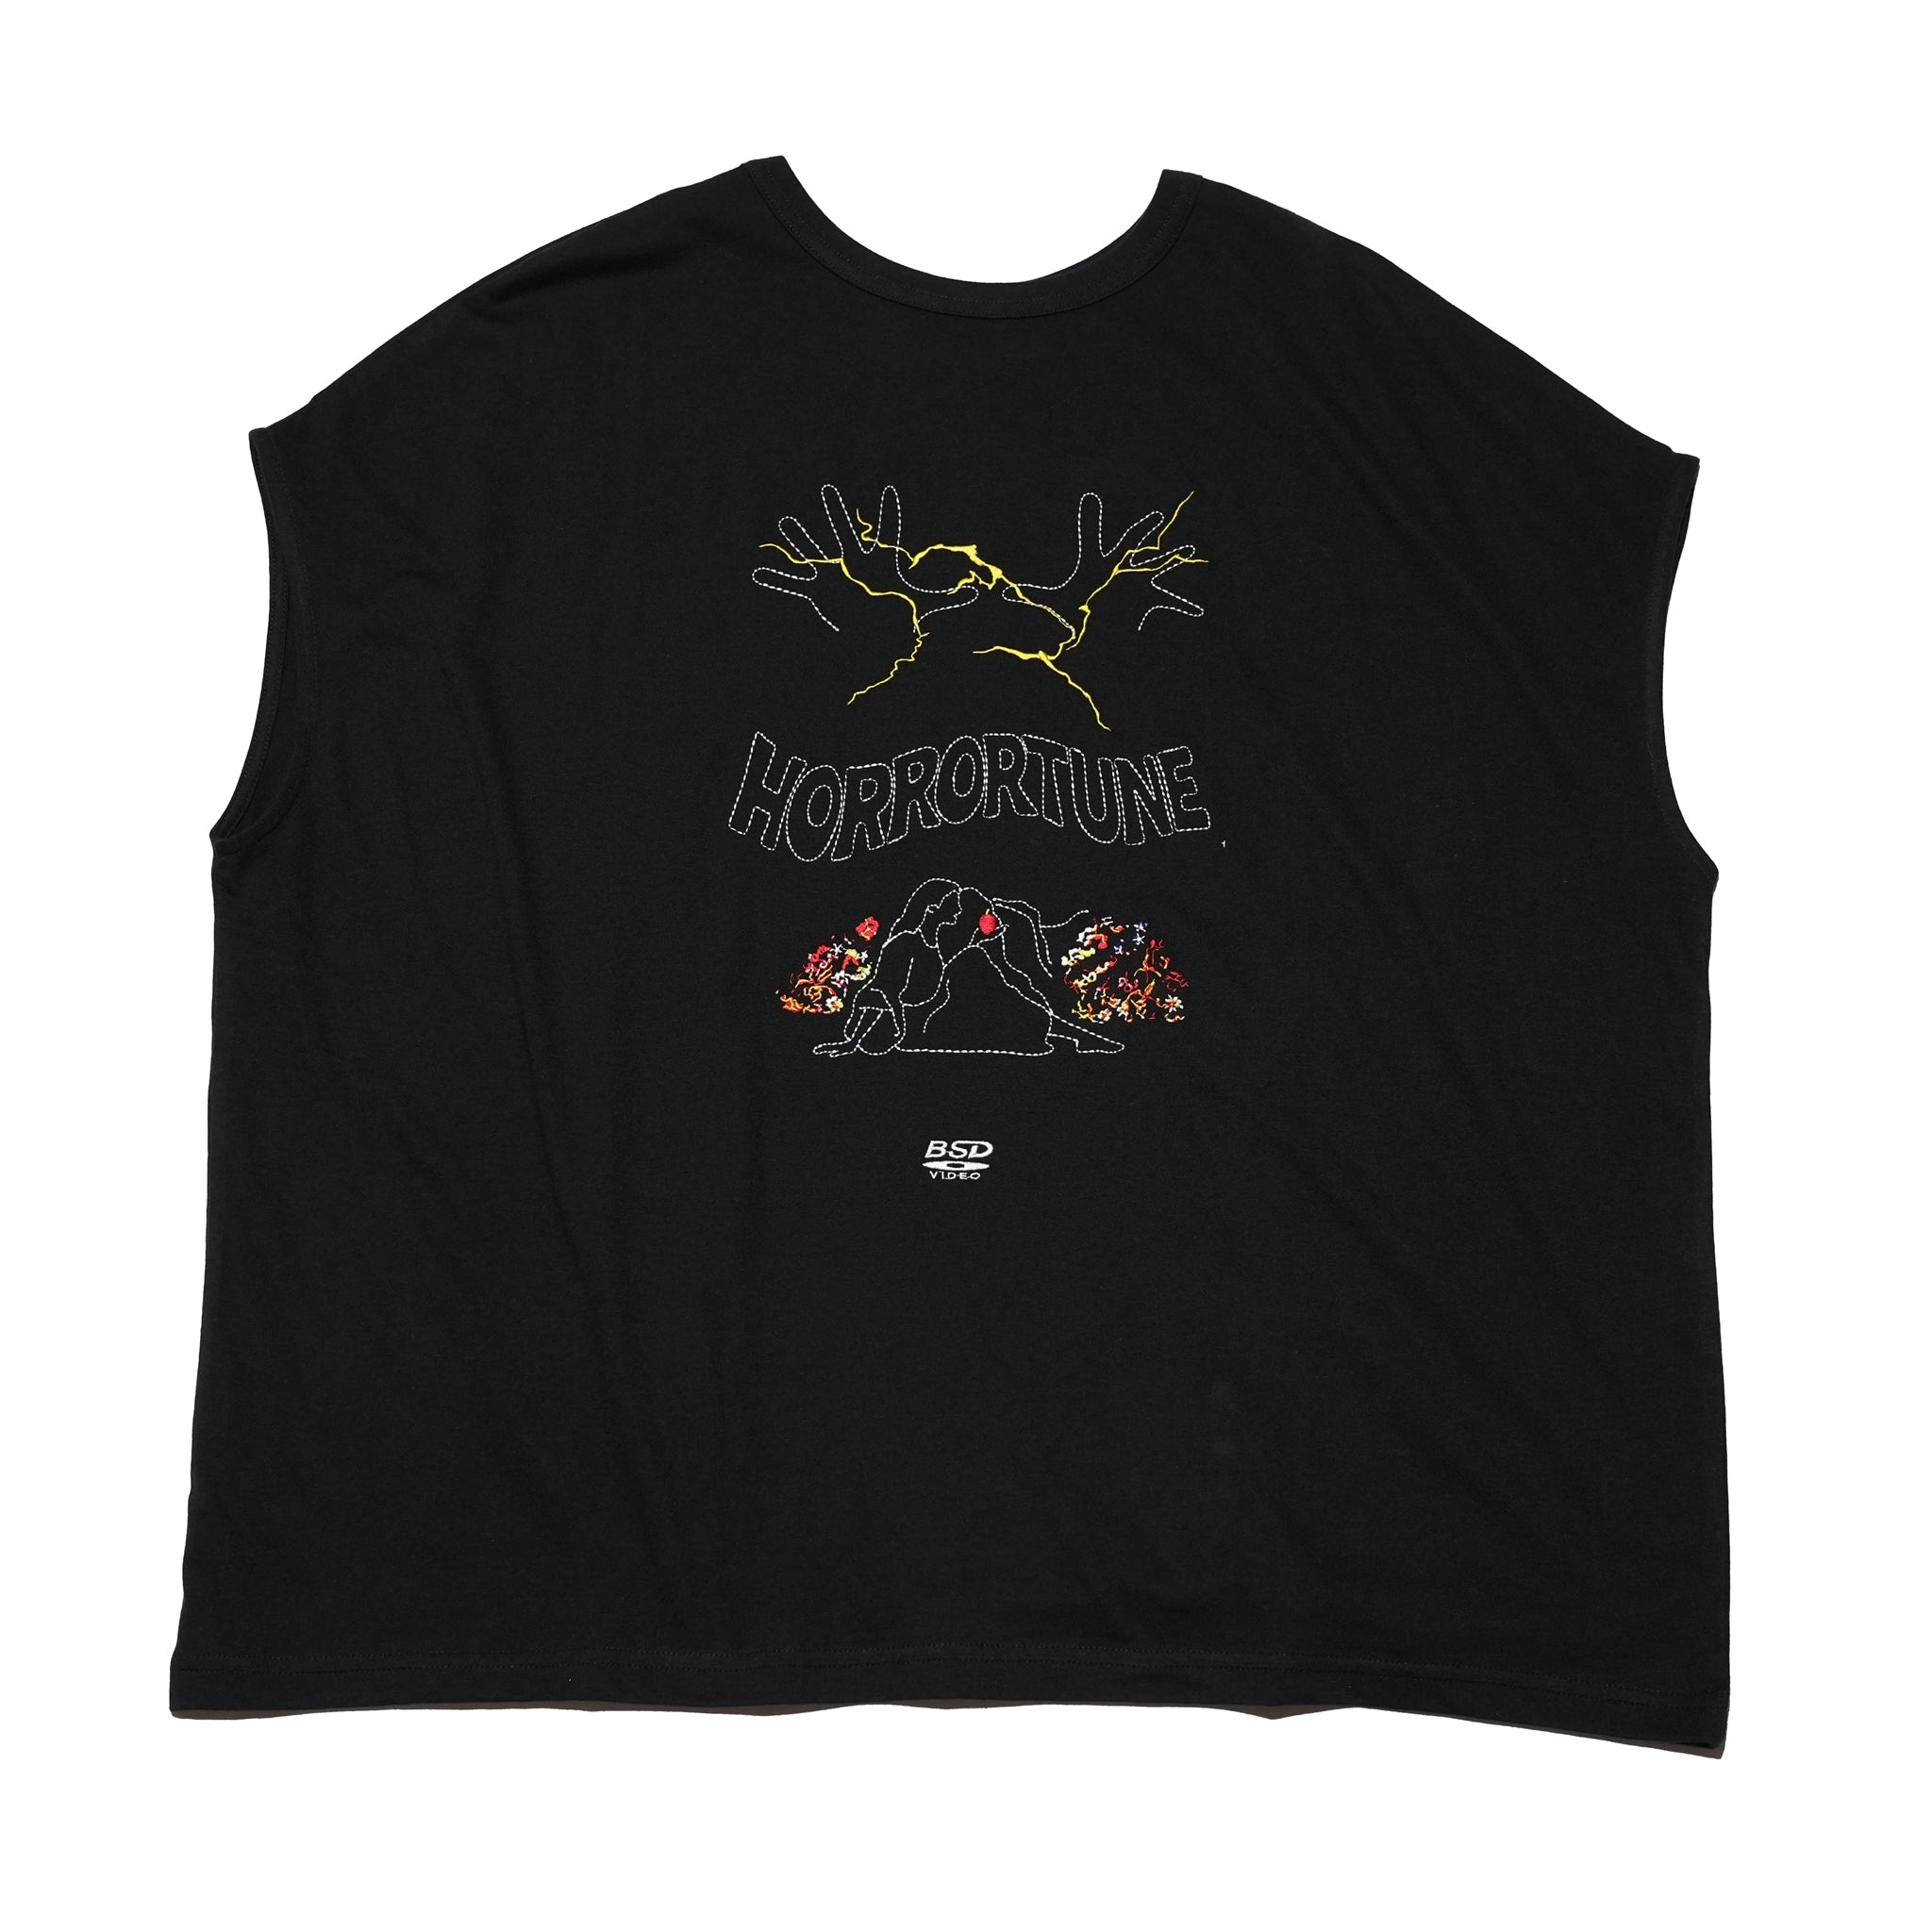 No:bsd24SS-19B | Name:UnKnown Tee/Horrortune | Color:Black【BEDSIDEDRAMA_ベッドサイドドラマ】